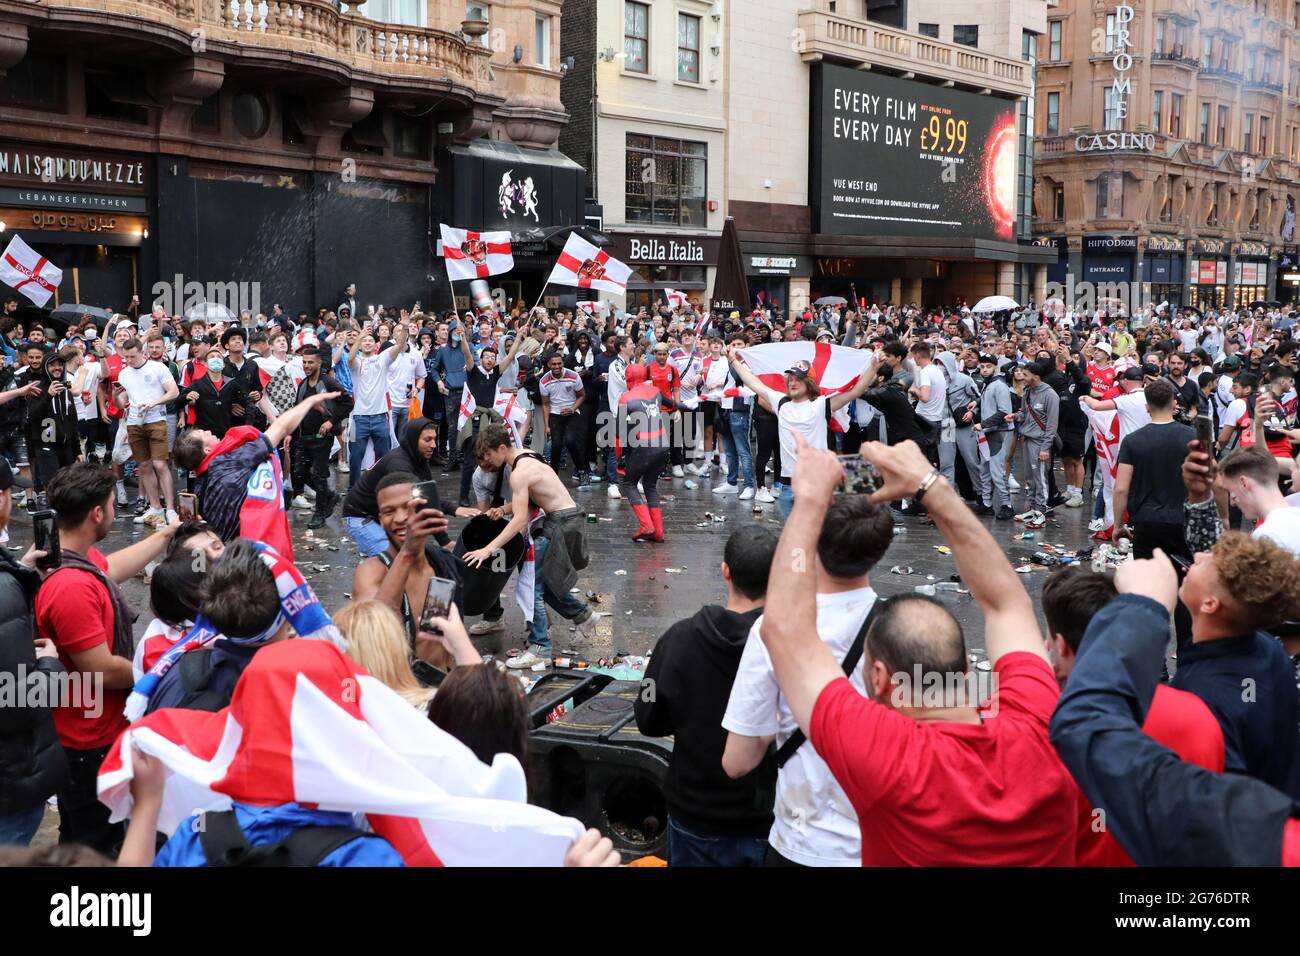 London, UK. 11th July, 2021. England football fans celebrating in Leicester Square ahead of the Italy v England Euros 2000 final in Leicester Square, London, and creating a huge amount of rubbish. Credit: Paul Brown/Alamy Live News Stock Photo